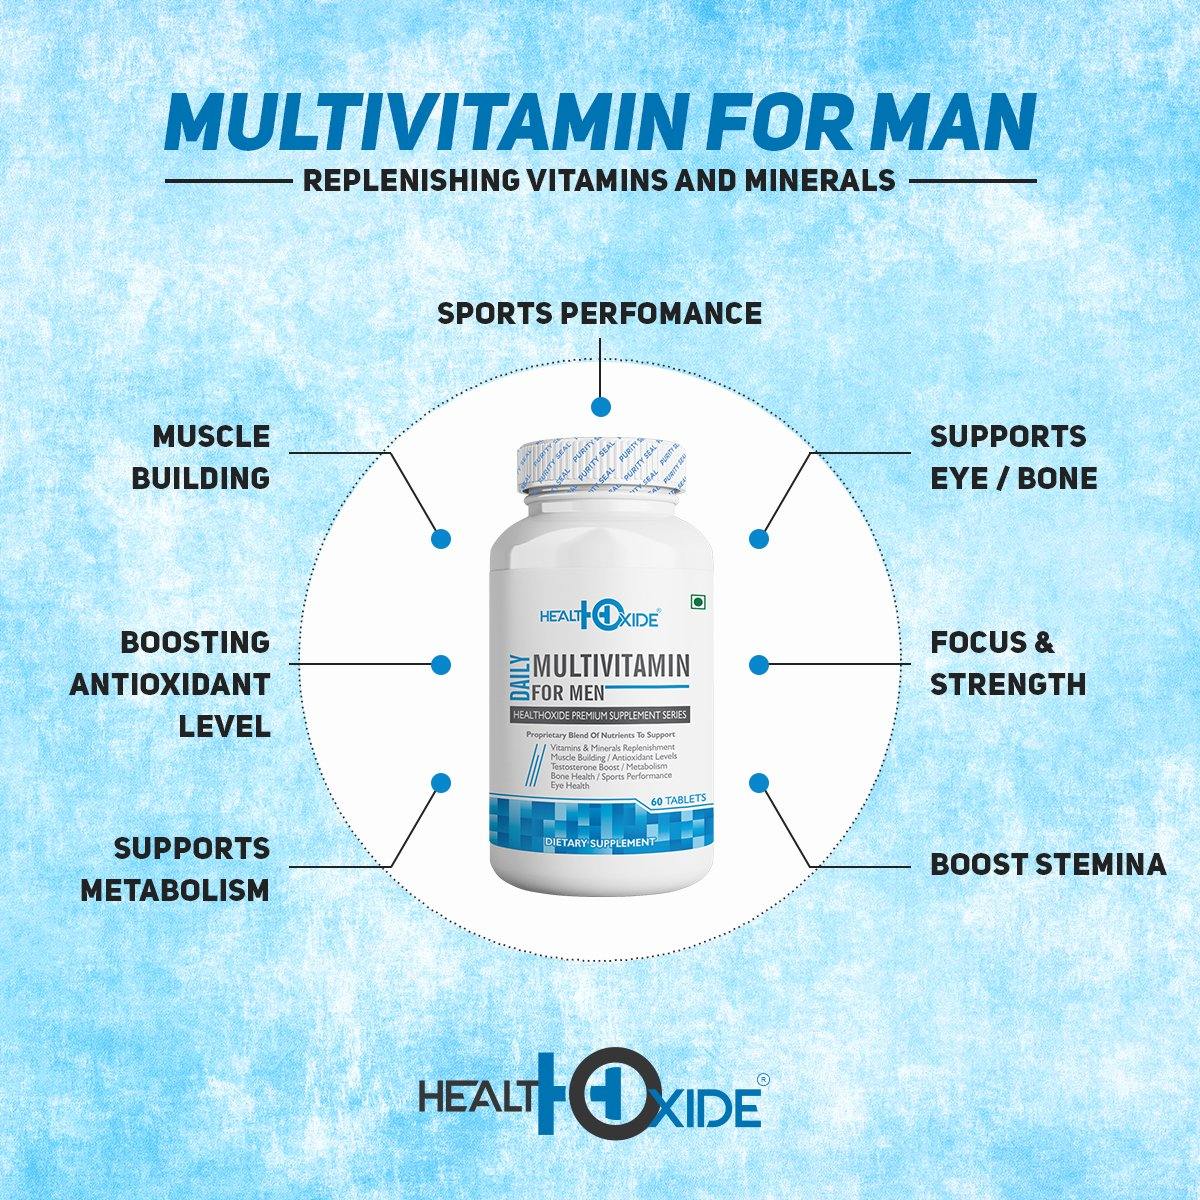 BEST VITAMINS TO TAKE FOR MEN